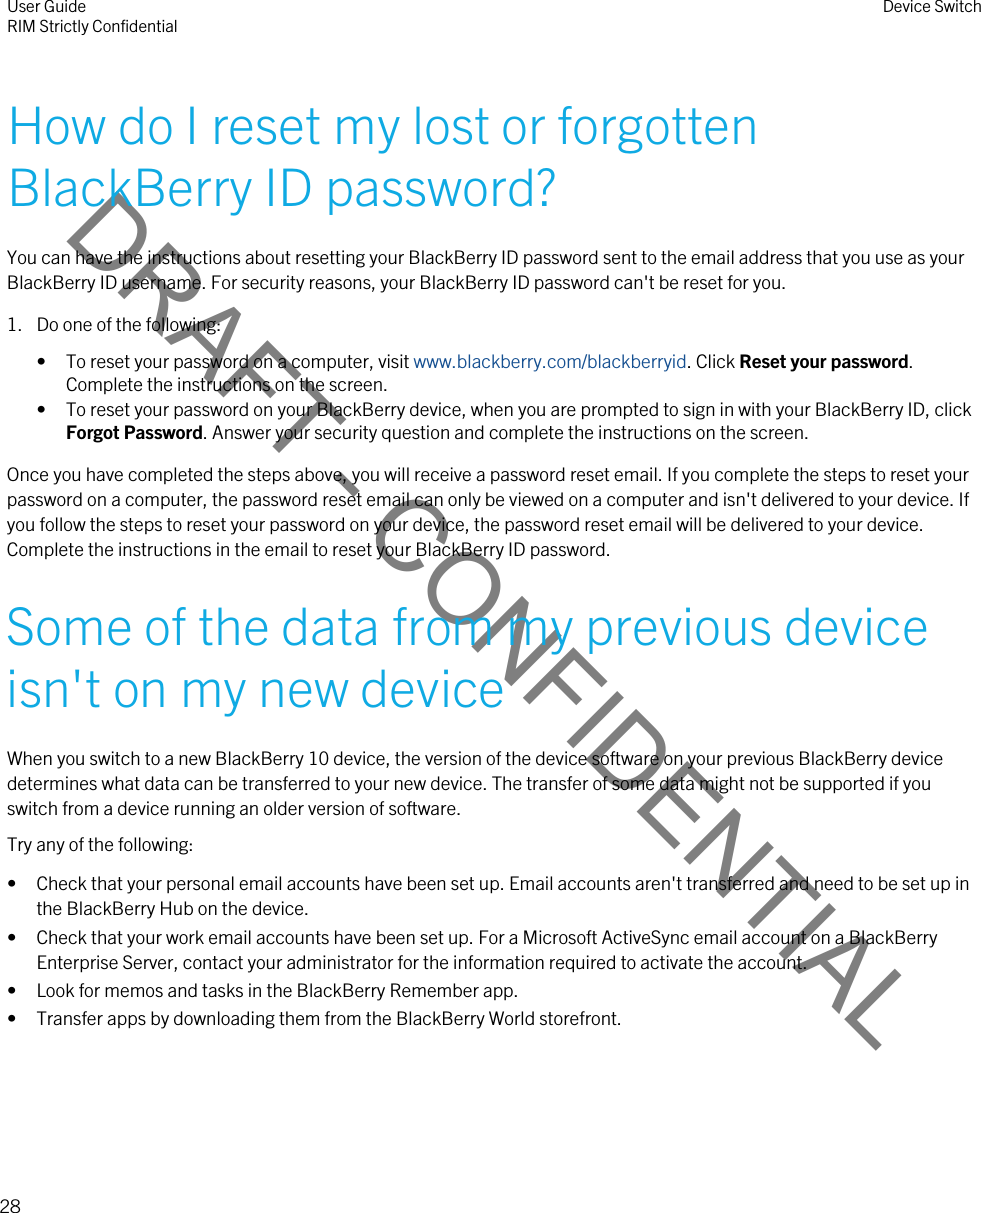 DRAFT - CONFIDENTIALHow do I reset my lost or forgotten BlackBerry ID password?You can have the instructions about resetting your BlackBerry ID password sent to the email address that you use as your BlackBerry ID username. For security reasons, your BlackBerry ID password can&apos;t be reset for you.1. Do one of the following:• To reset your password on a computer, visit www.blackberry.com/blackberryid. Click Reset your password. Complete the instructions on the screen.• To reset your password on your BlackBerry device, when you are prompted to sign in with your BlackBerry ID, click Forgot Password. Answer your security question and complete the instructions on the screen.Once you have completed the steps above, you will receive a password reset email. If you complete the steps to reset your password on a computer, the password reset email can only be viewed on a computer and isn&apos;t delivered to your device. If you follow the steps to reset your password on your device, the password reset email will be delivered to your device. Complete the instructions in the email to reset your BlackBerry ID password.Some of the data from my previous device isn&apos;t on my new deviceWhen you switch to a new BlackBerry 10 device, the version of the device software on your previous BlackBerry device determines what data can be transferred to your new device. The transfer of some data might not be supported if you switch from a device running an older version of software.Try any of the following:• Check that your personal email accounts have been set up. Email accounts aren&apos;t transferred and need to be set up in the BlackBerry Hub on the device.• Check that your work email accounts have been set up. For a Microsoft ActiveSync email account on a BlackBerry Enterprise Server, contact your administrator for the information required to activate the account.• Look for memos and tasks in the BlackBerry Remember app.• Transfer apps by downloading them from the BlackBerry World storefront.User GuideRIM Strictly Confidential Device Switch28 